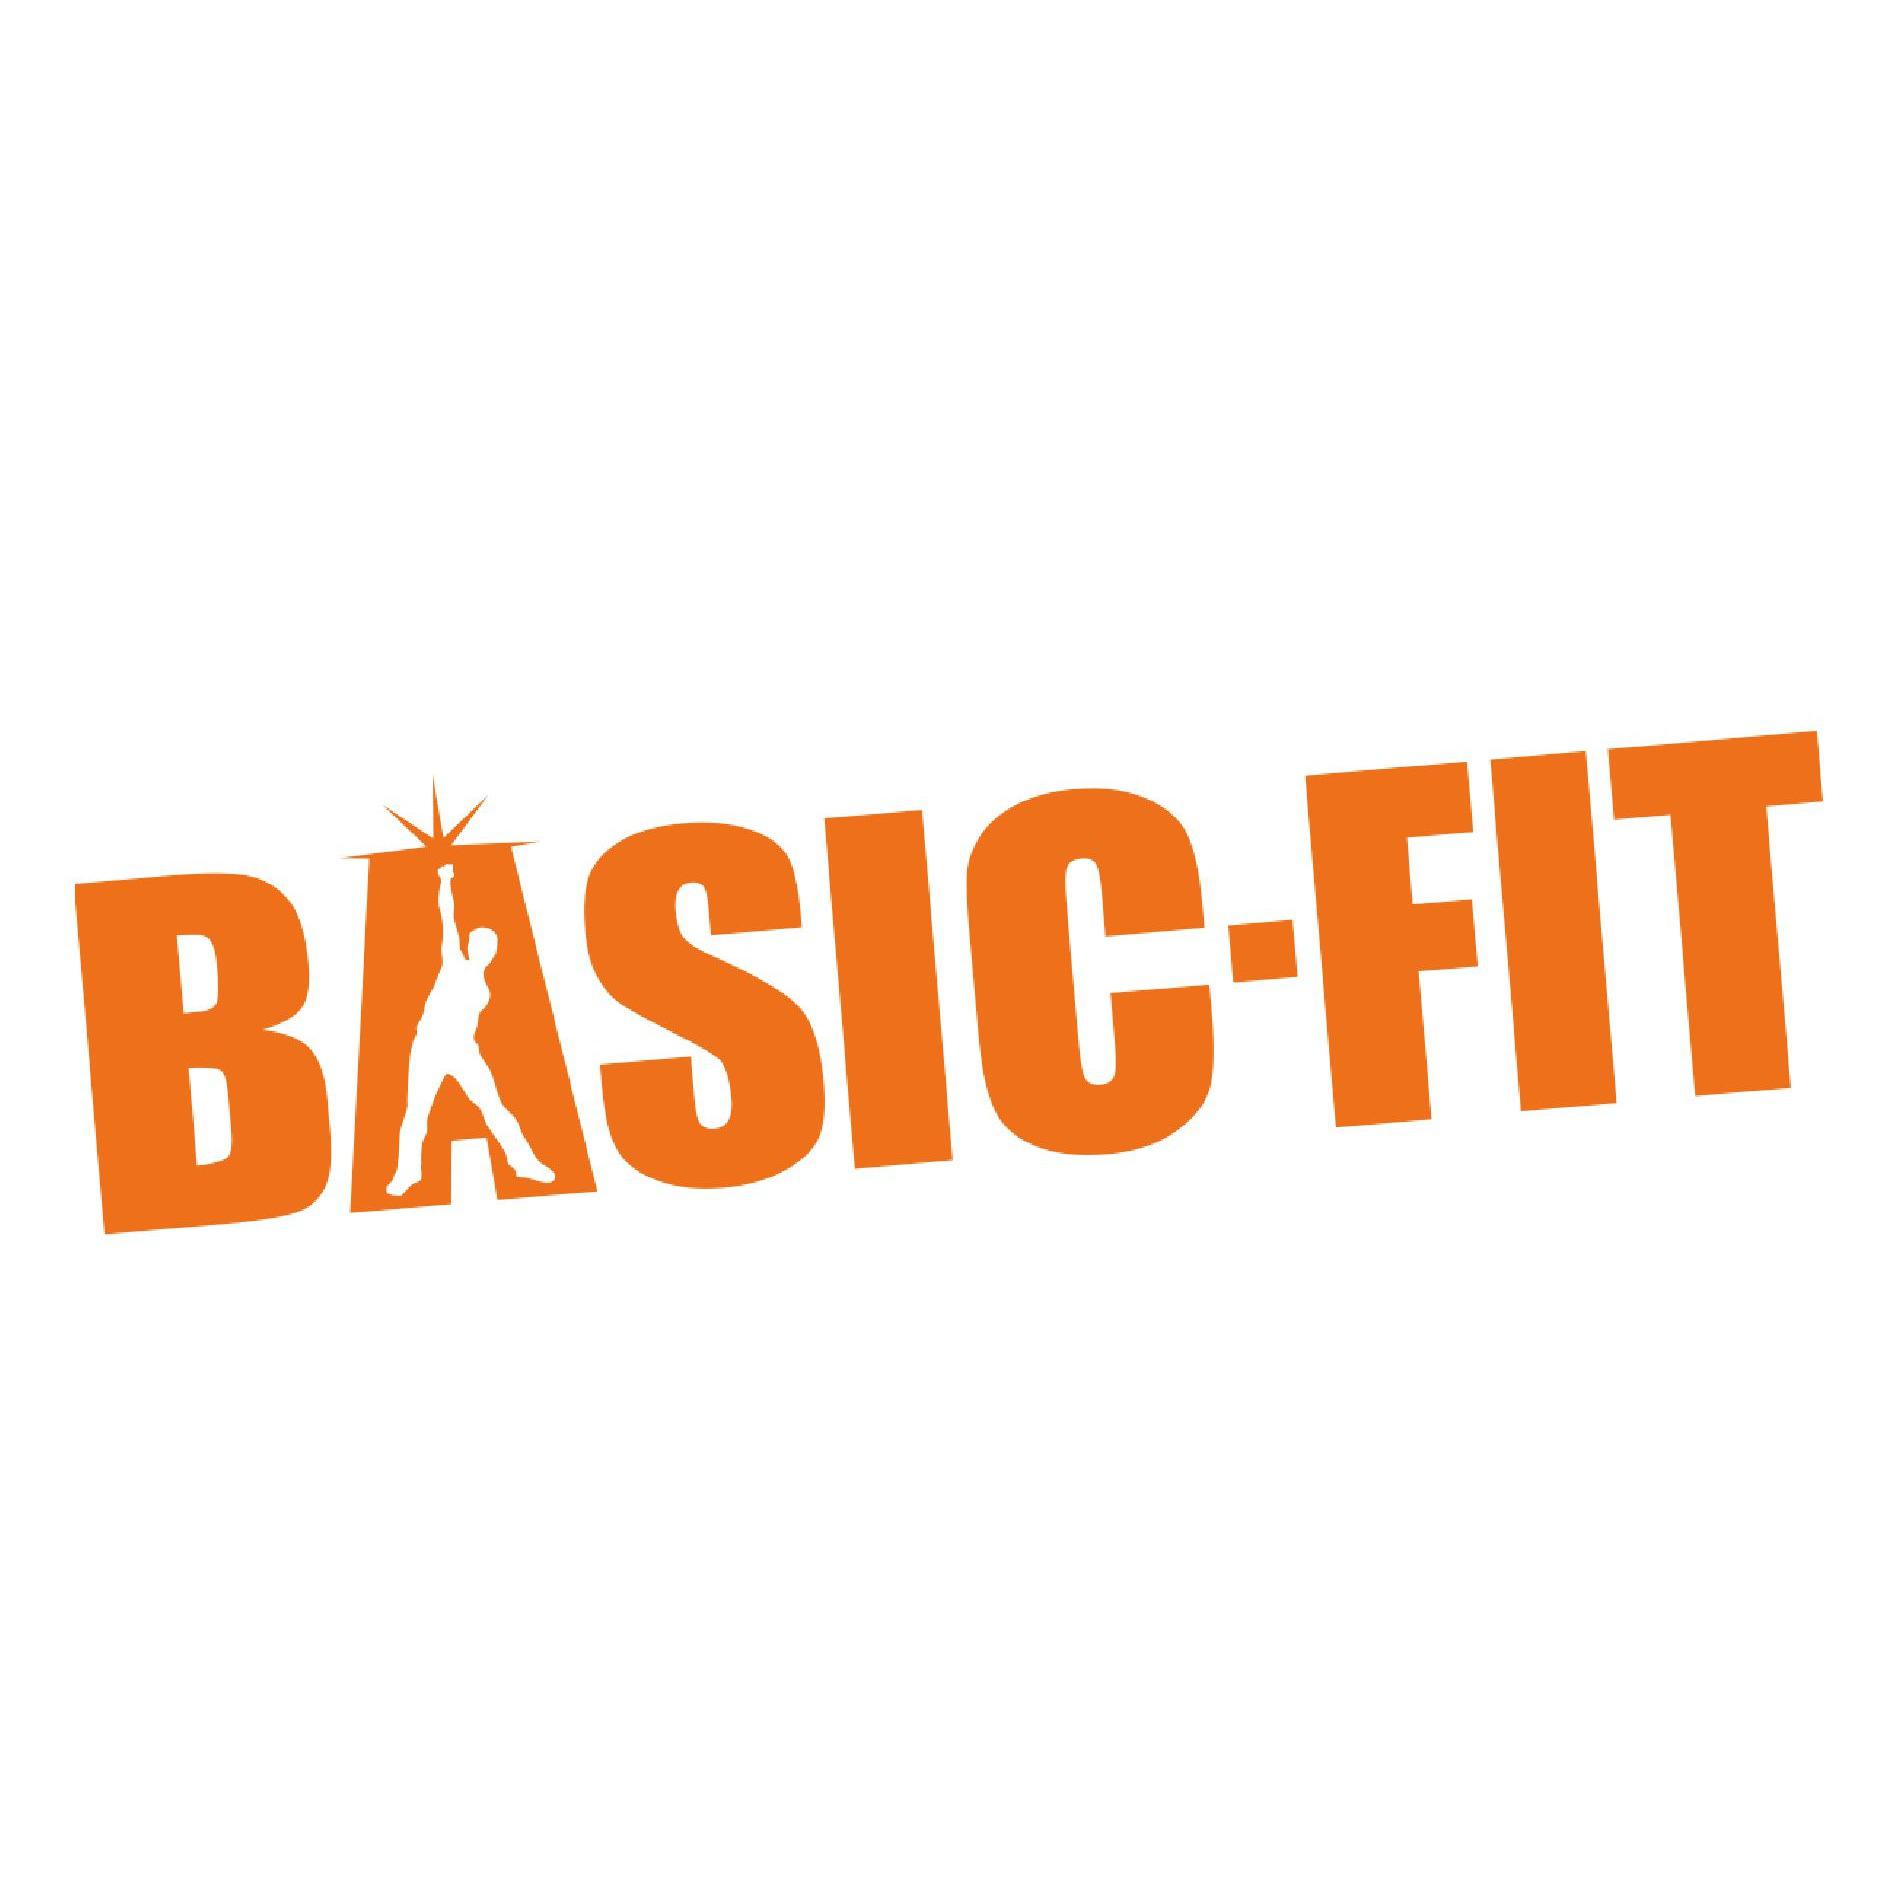 Basic-Fit Charleroi-Couillet Route Philippeville 24/7